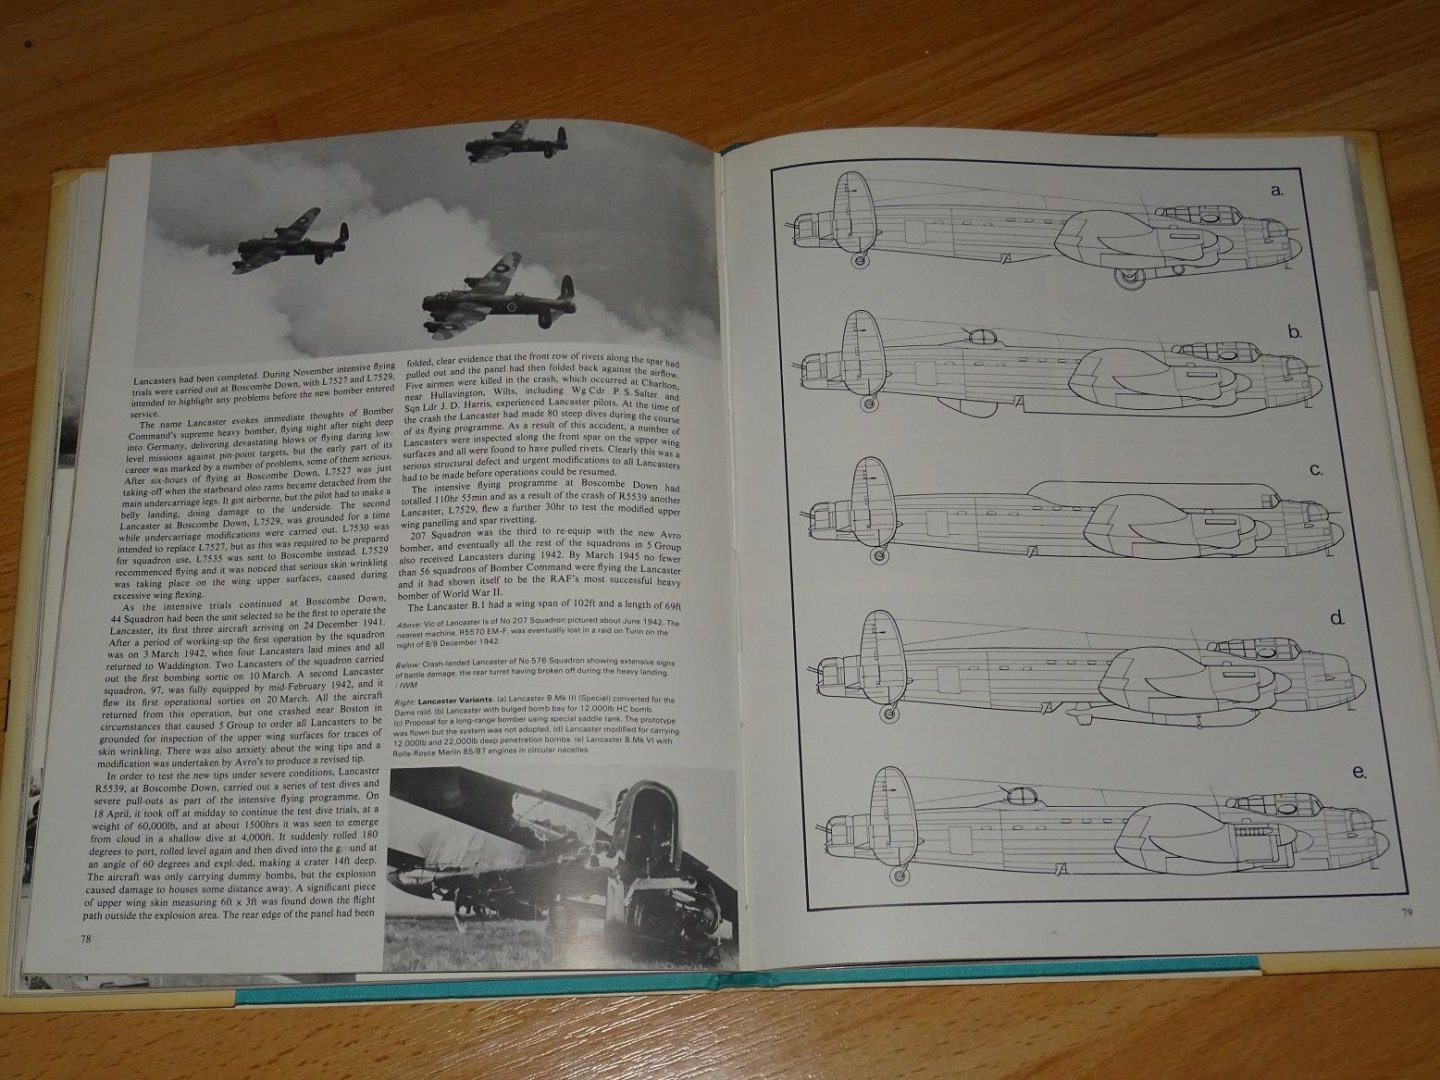 Goulding, James & Moyes, Philip - RAF Bomber Command and its aircraft 1941 - 1945 volume 2